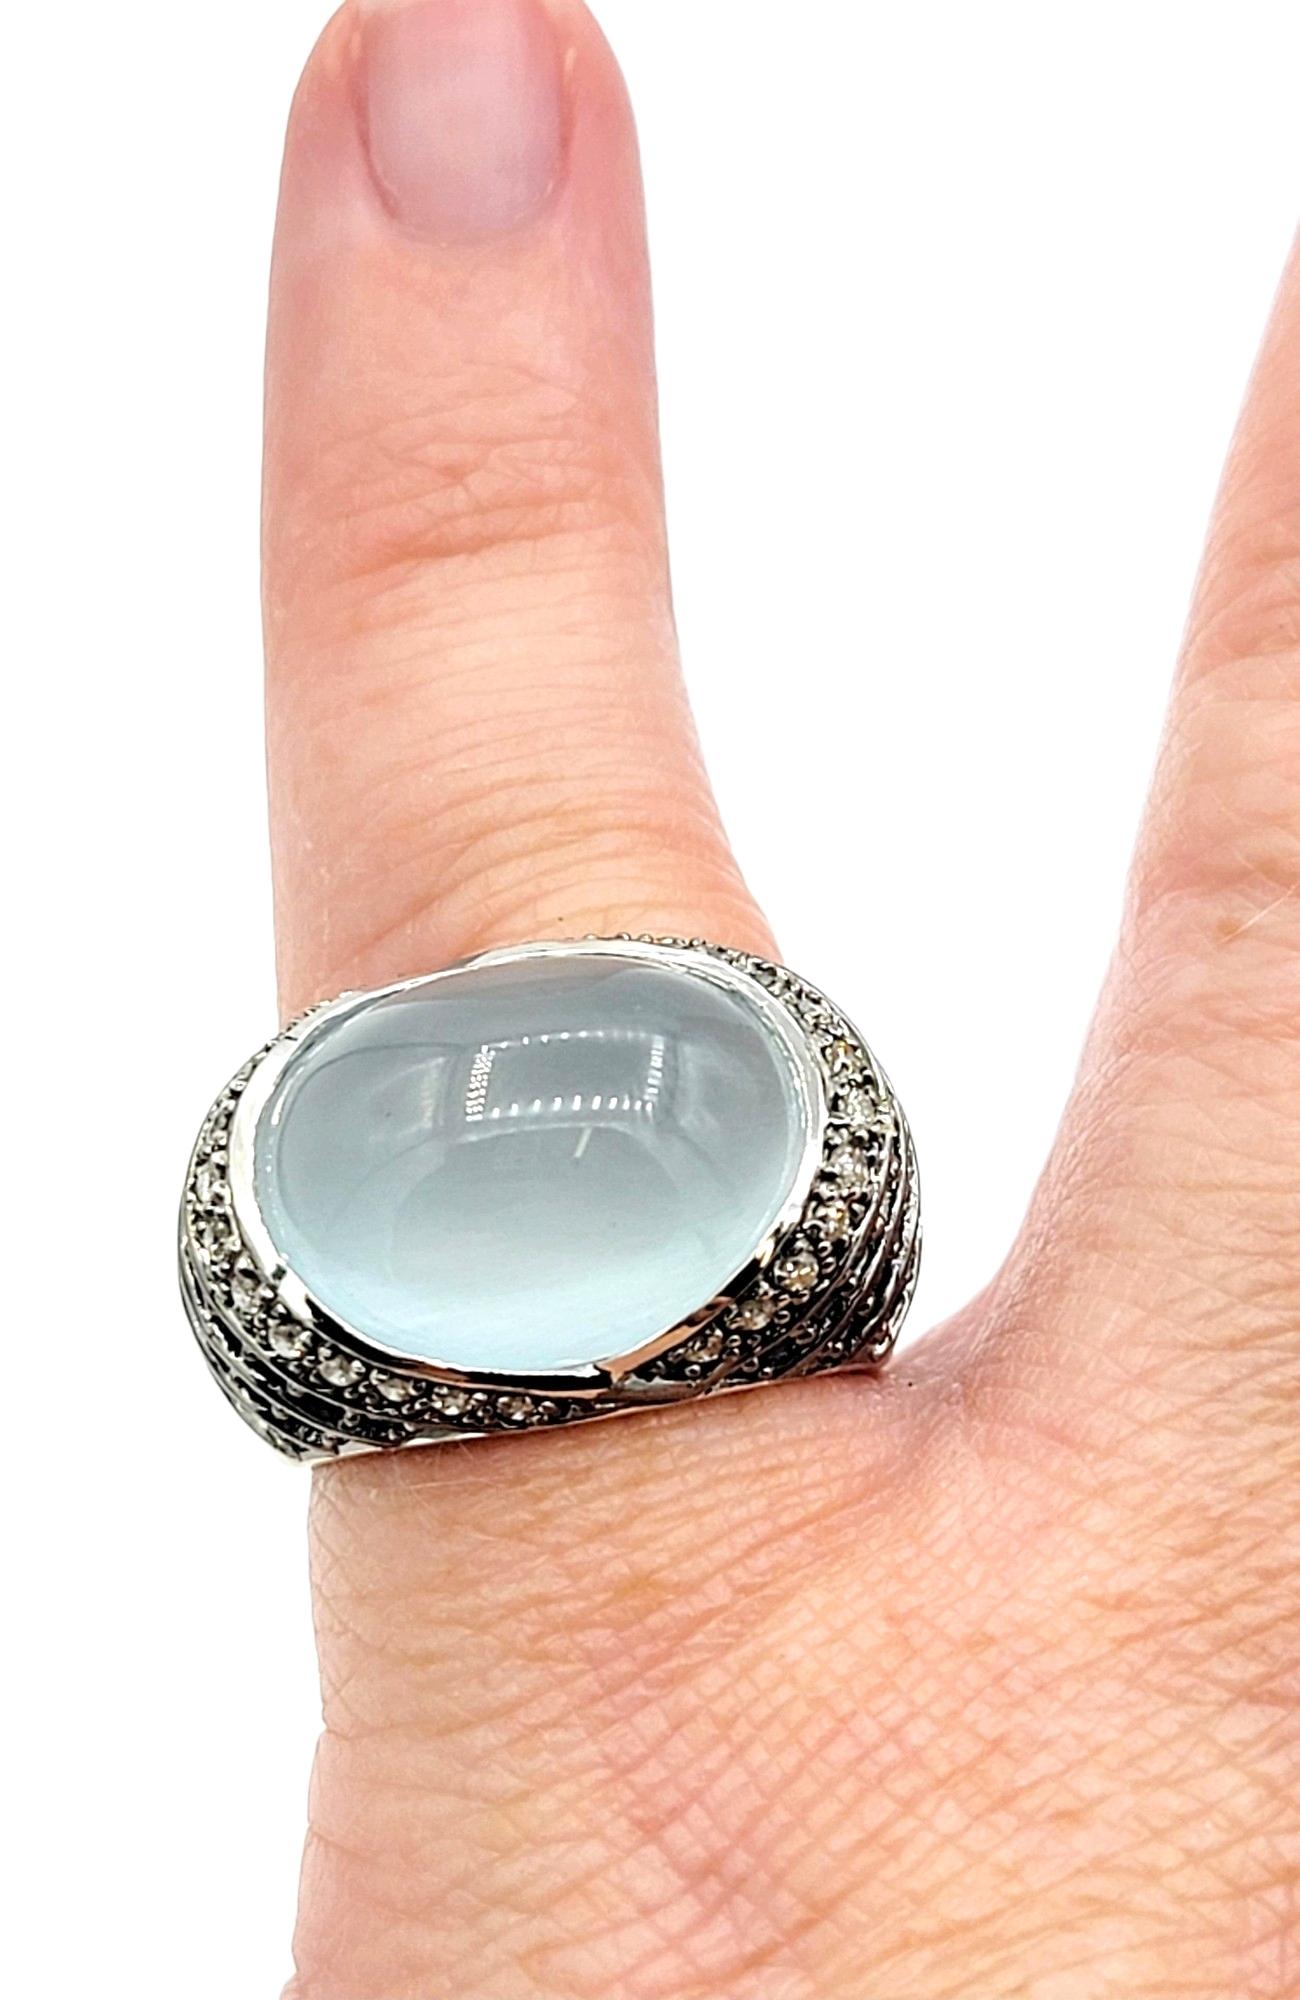 Le Vian Oval Cabochon Moonstone Cocktail Ring with Sapphire & Diamond Accents   For Sale 3